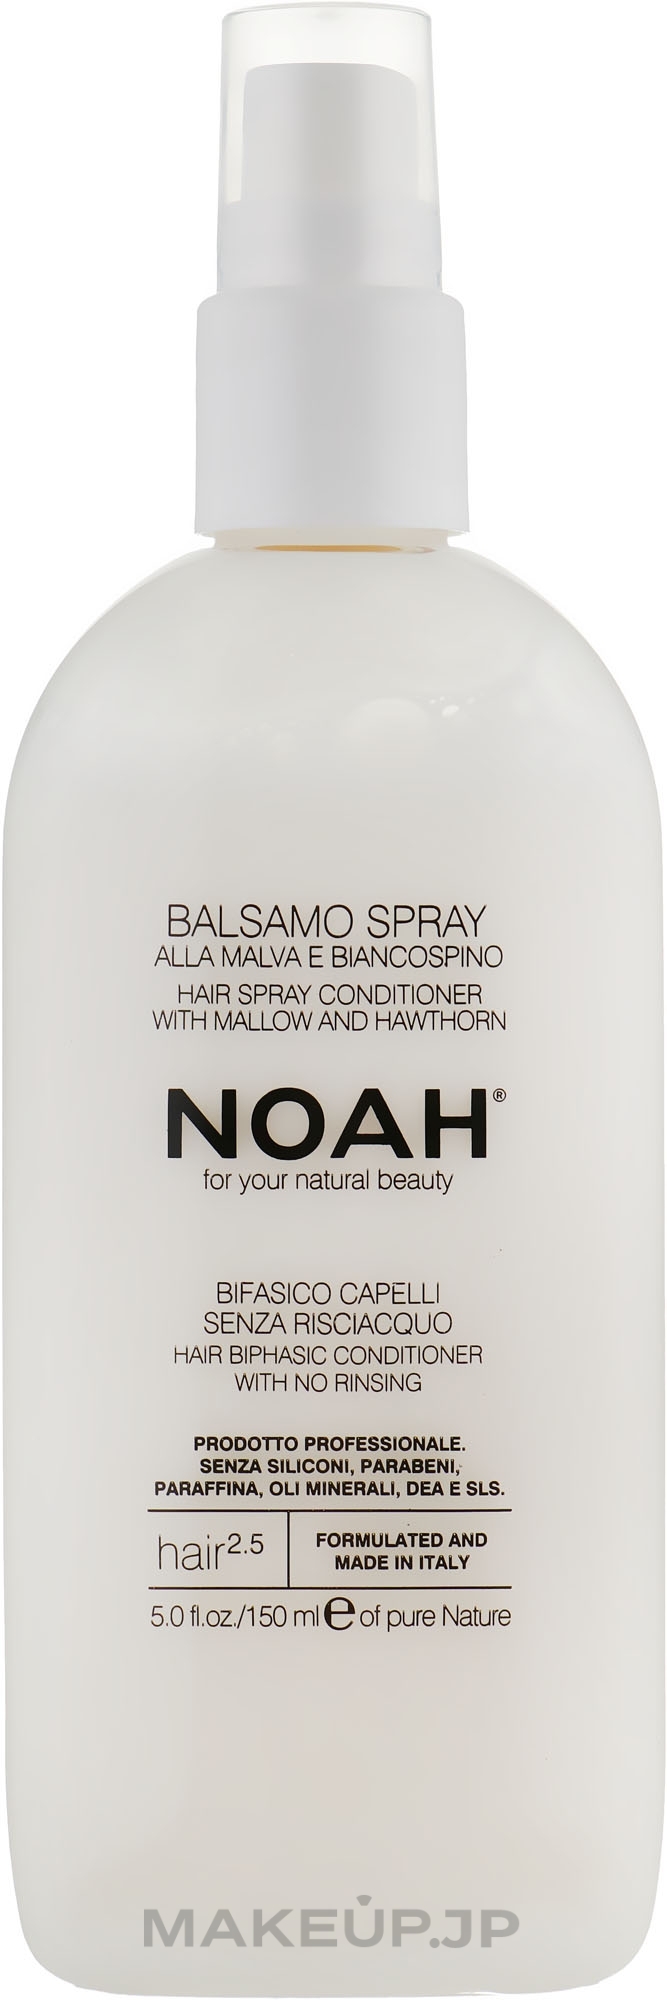 Leave-In Conditioner Spray - Noah Hair Spray Conditioner With Mallow And Hawthorn — photo 150 ml